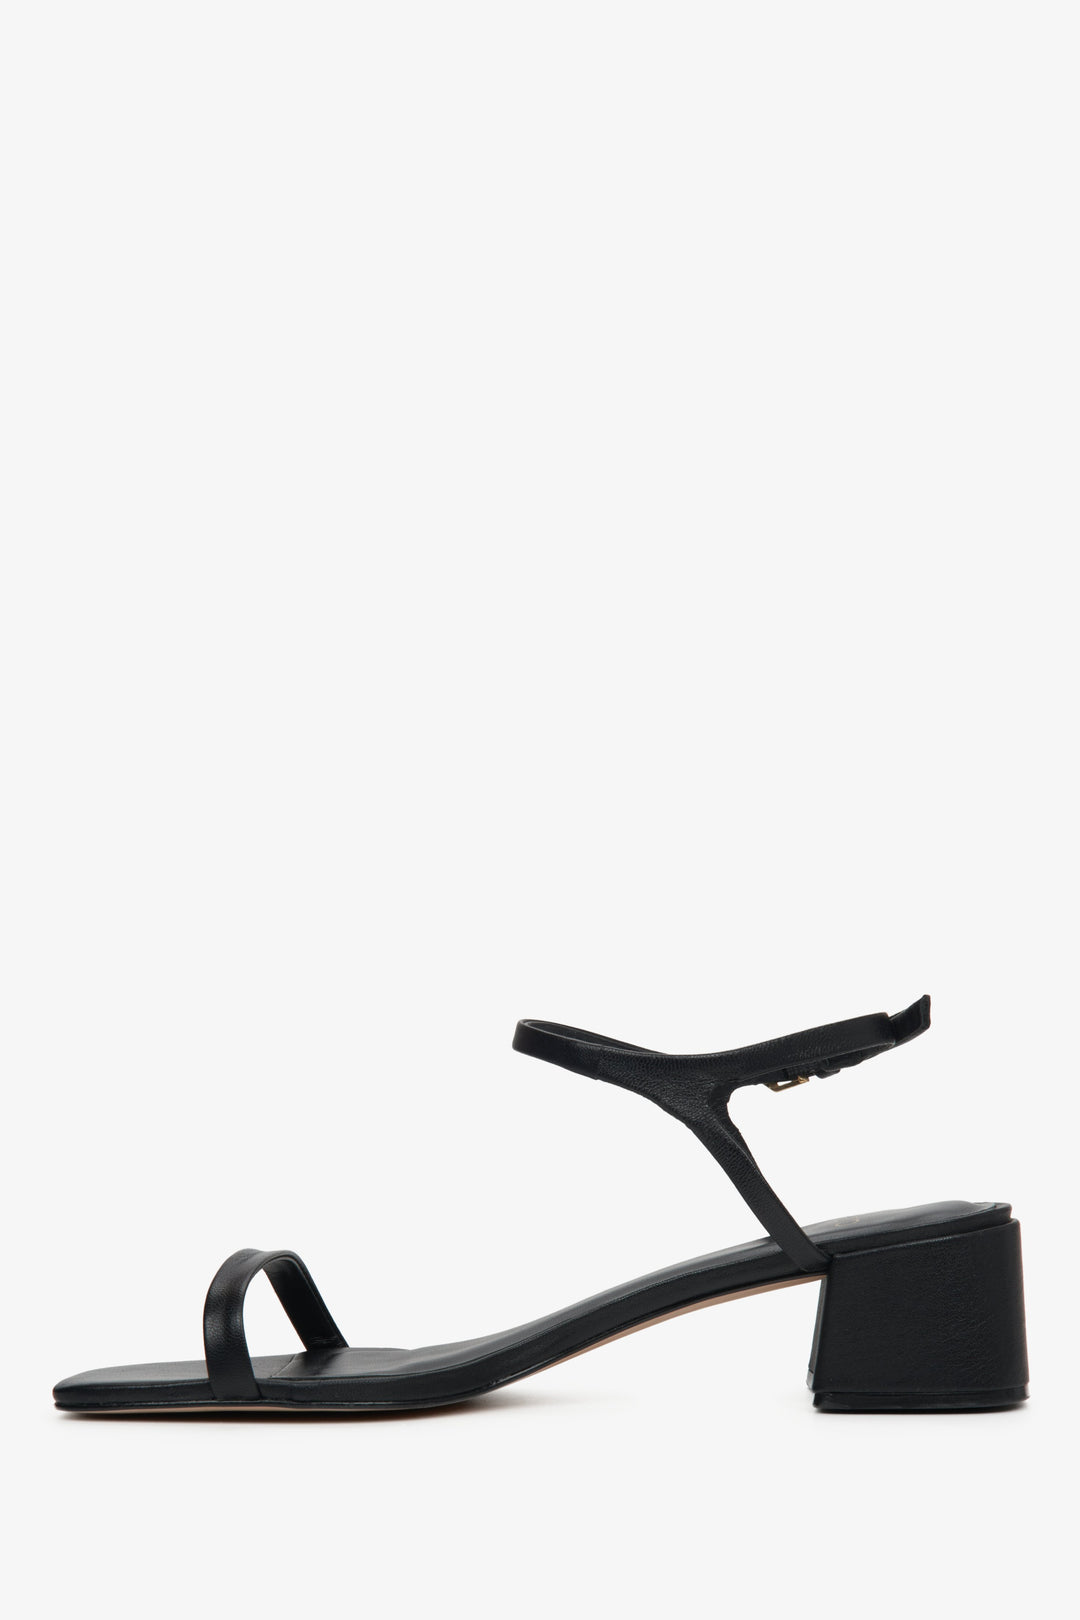 Comfortable women's low-heeled sandals made of genuine black leather by Estro - shoe profile.